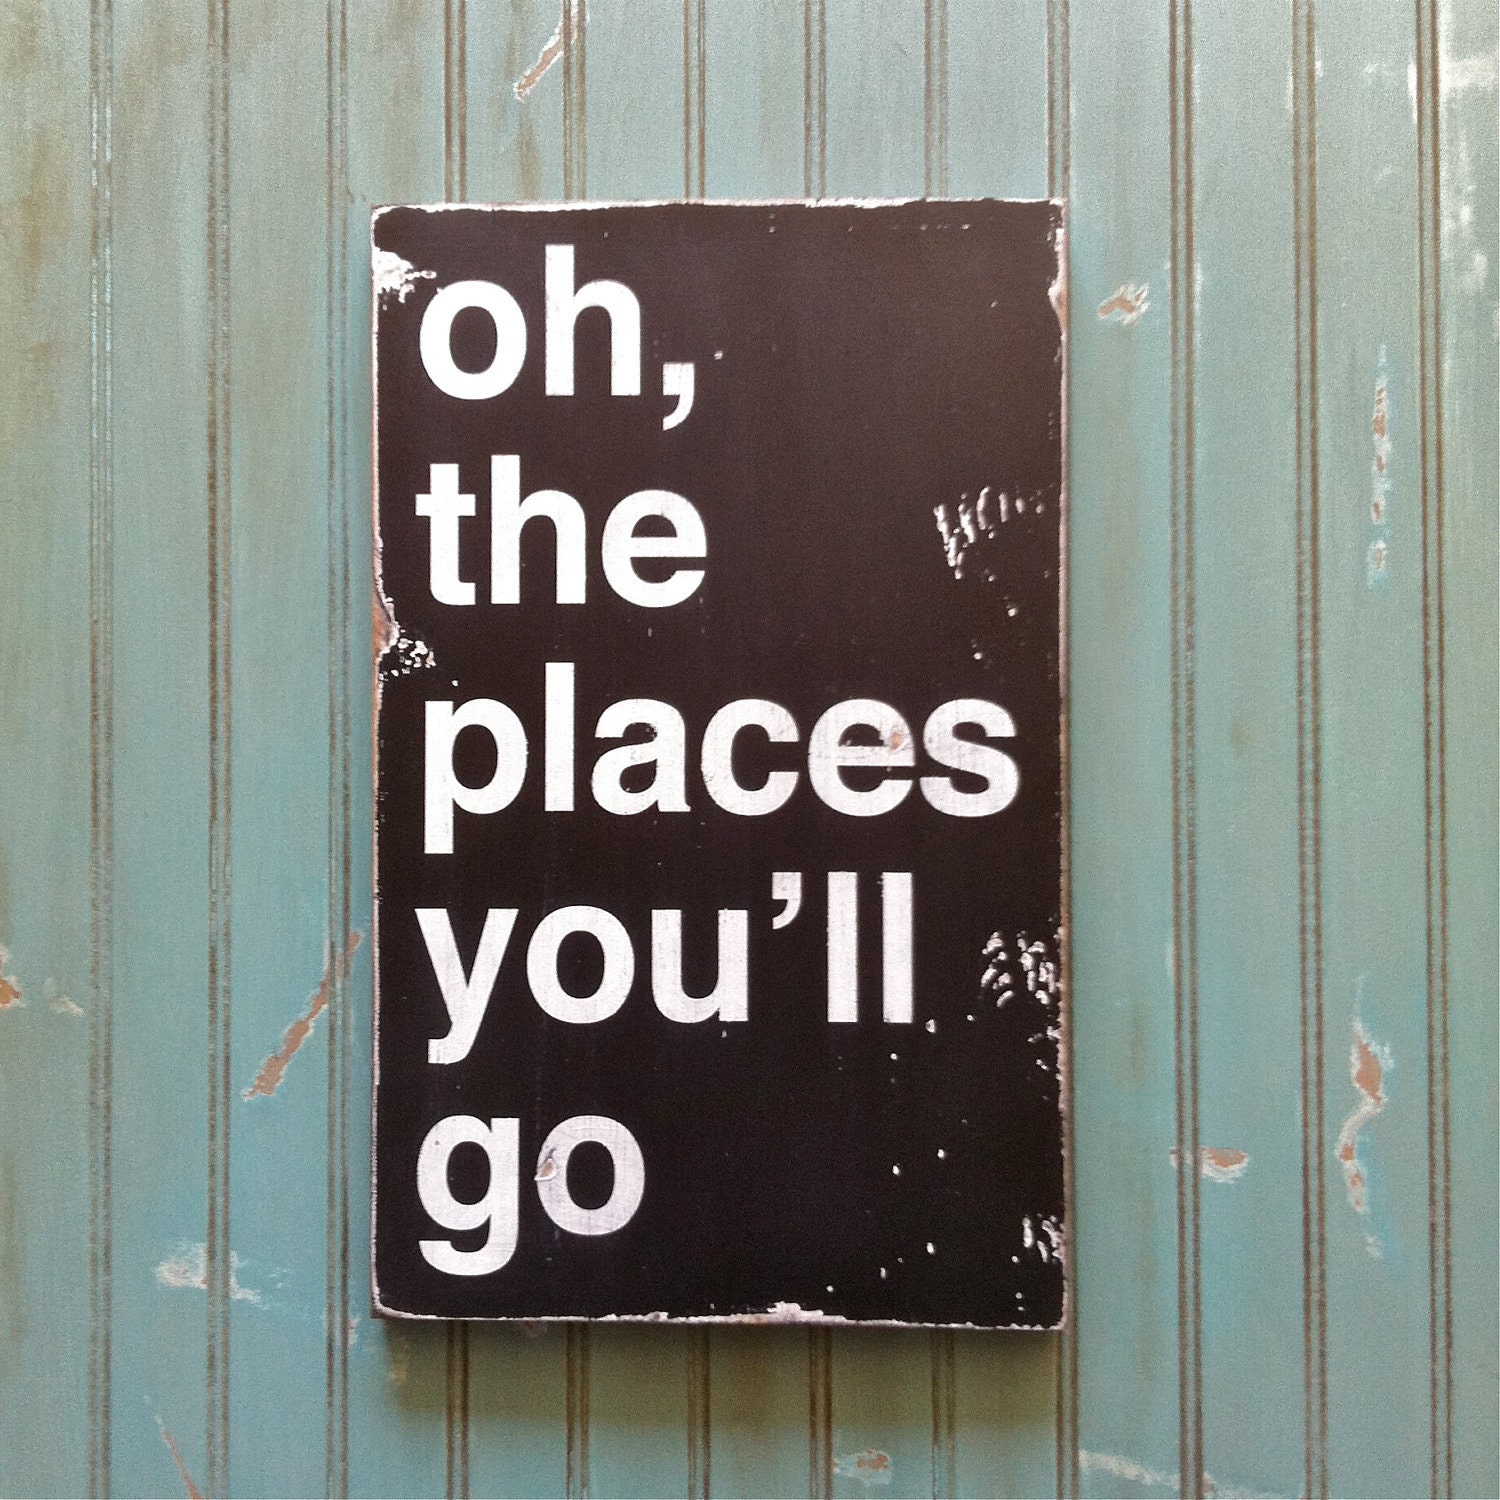 Oh, The Places You'll Go - Dr. Seuss Inspired Distressed Sign in Black with White Vintage Style